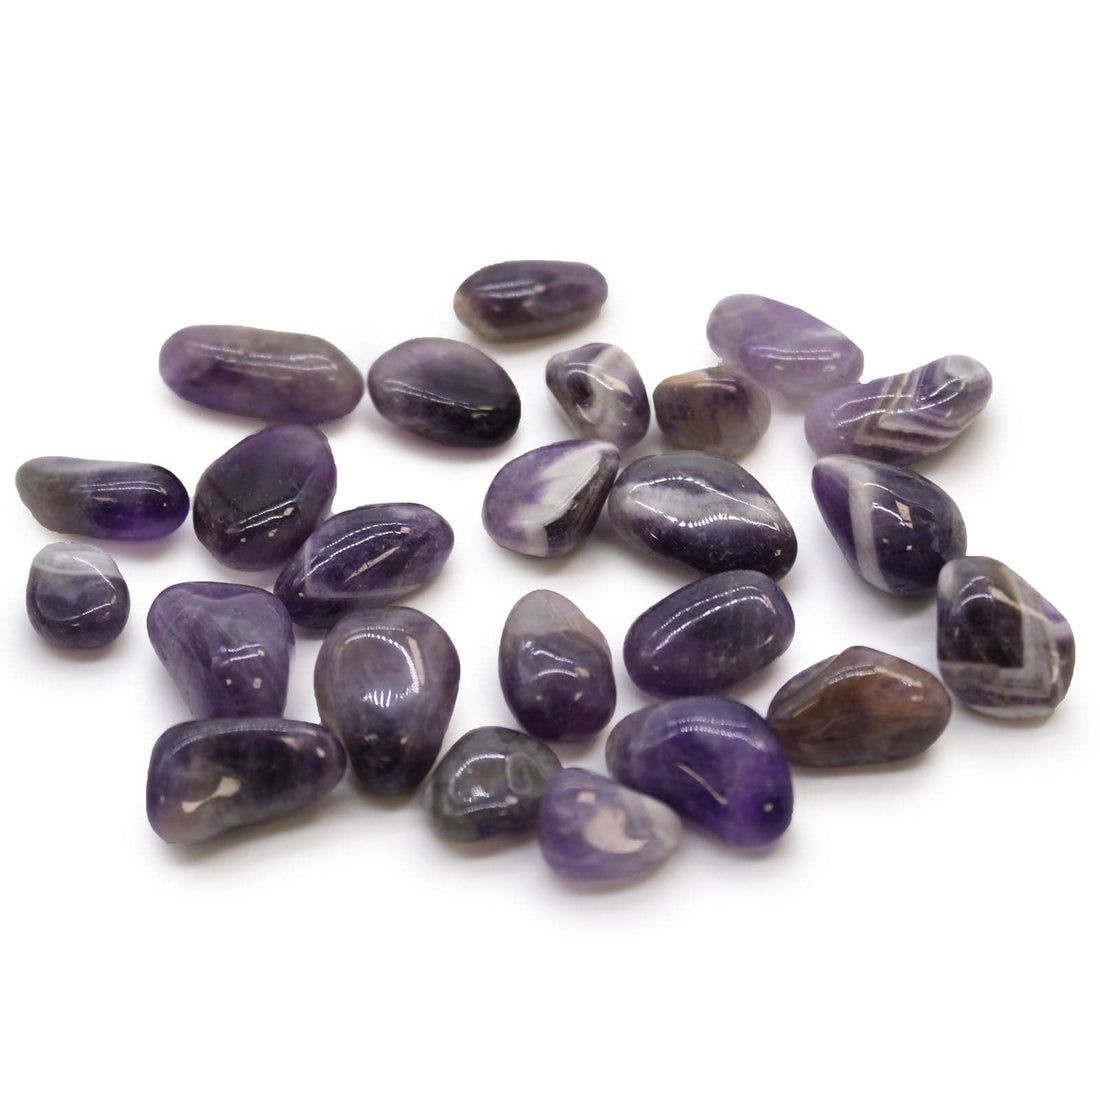 Small African Tumble Stones - Amethyst - best price from Maltashopper.com ATUMBLES-17